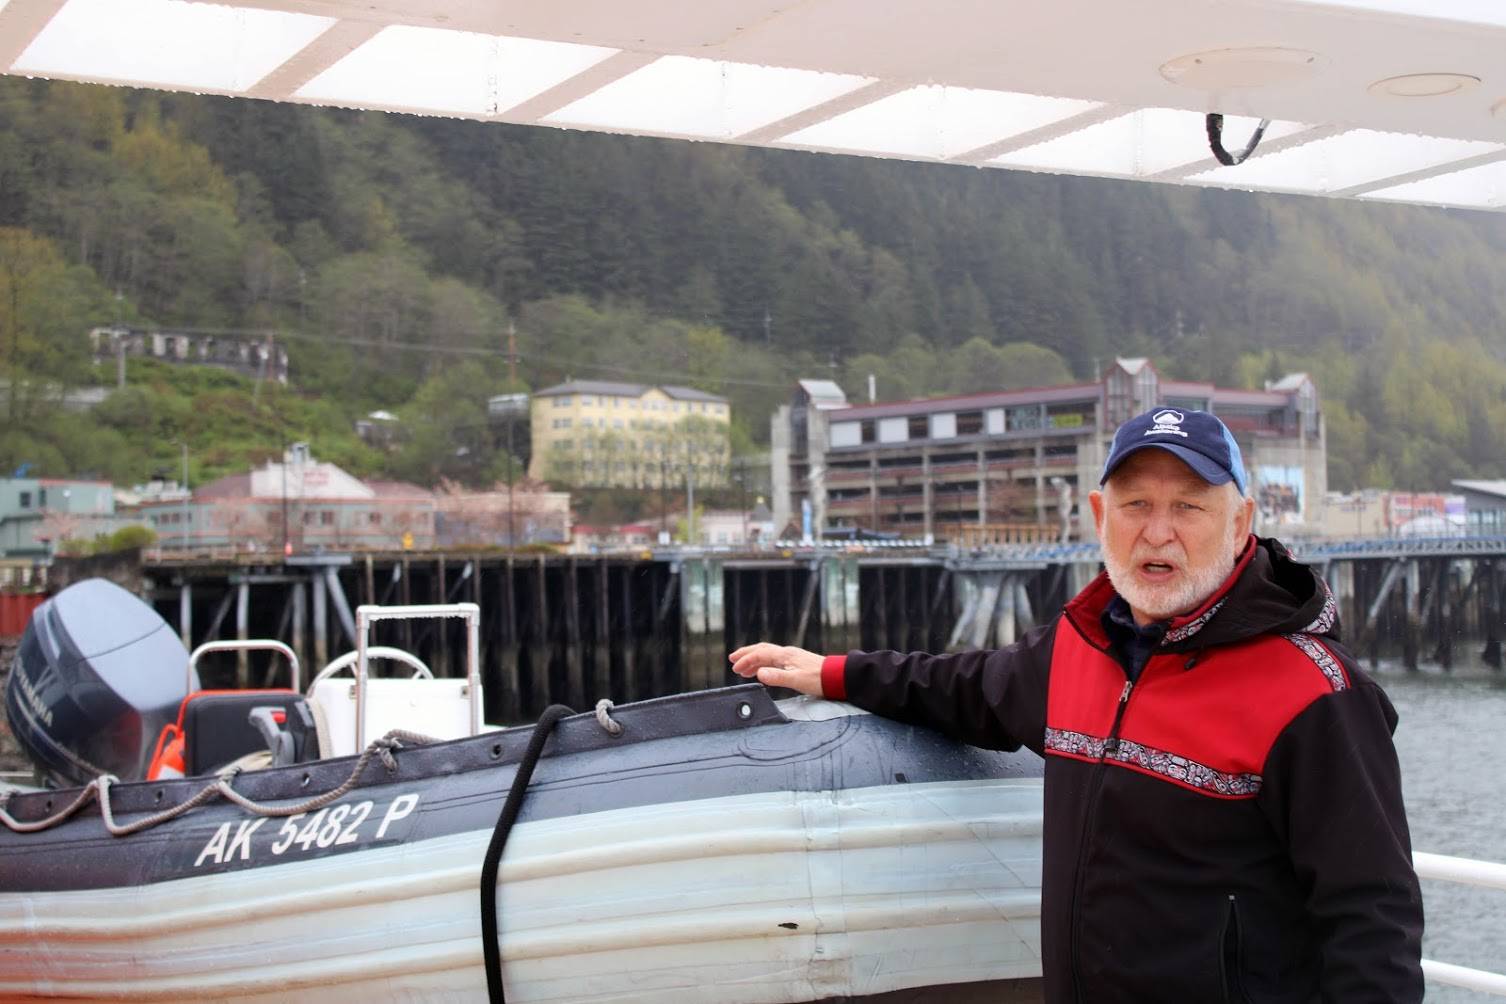 Dan Blanchard, CEO of UnCruise Adventures explains that guests often climb onto inflatable skiffs to get a closer look at Alaska's wonders. “We are wilderness-based,” he said, adding that the ship is the destination in traditional cruises. However, for UnCruise, the sites of Alaska are the main attractions. (Dana Zigmund/Juneau Empire)